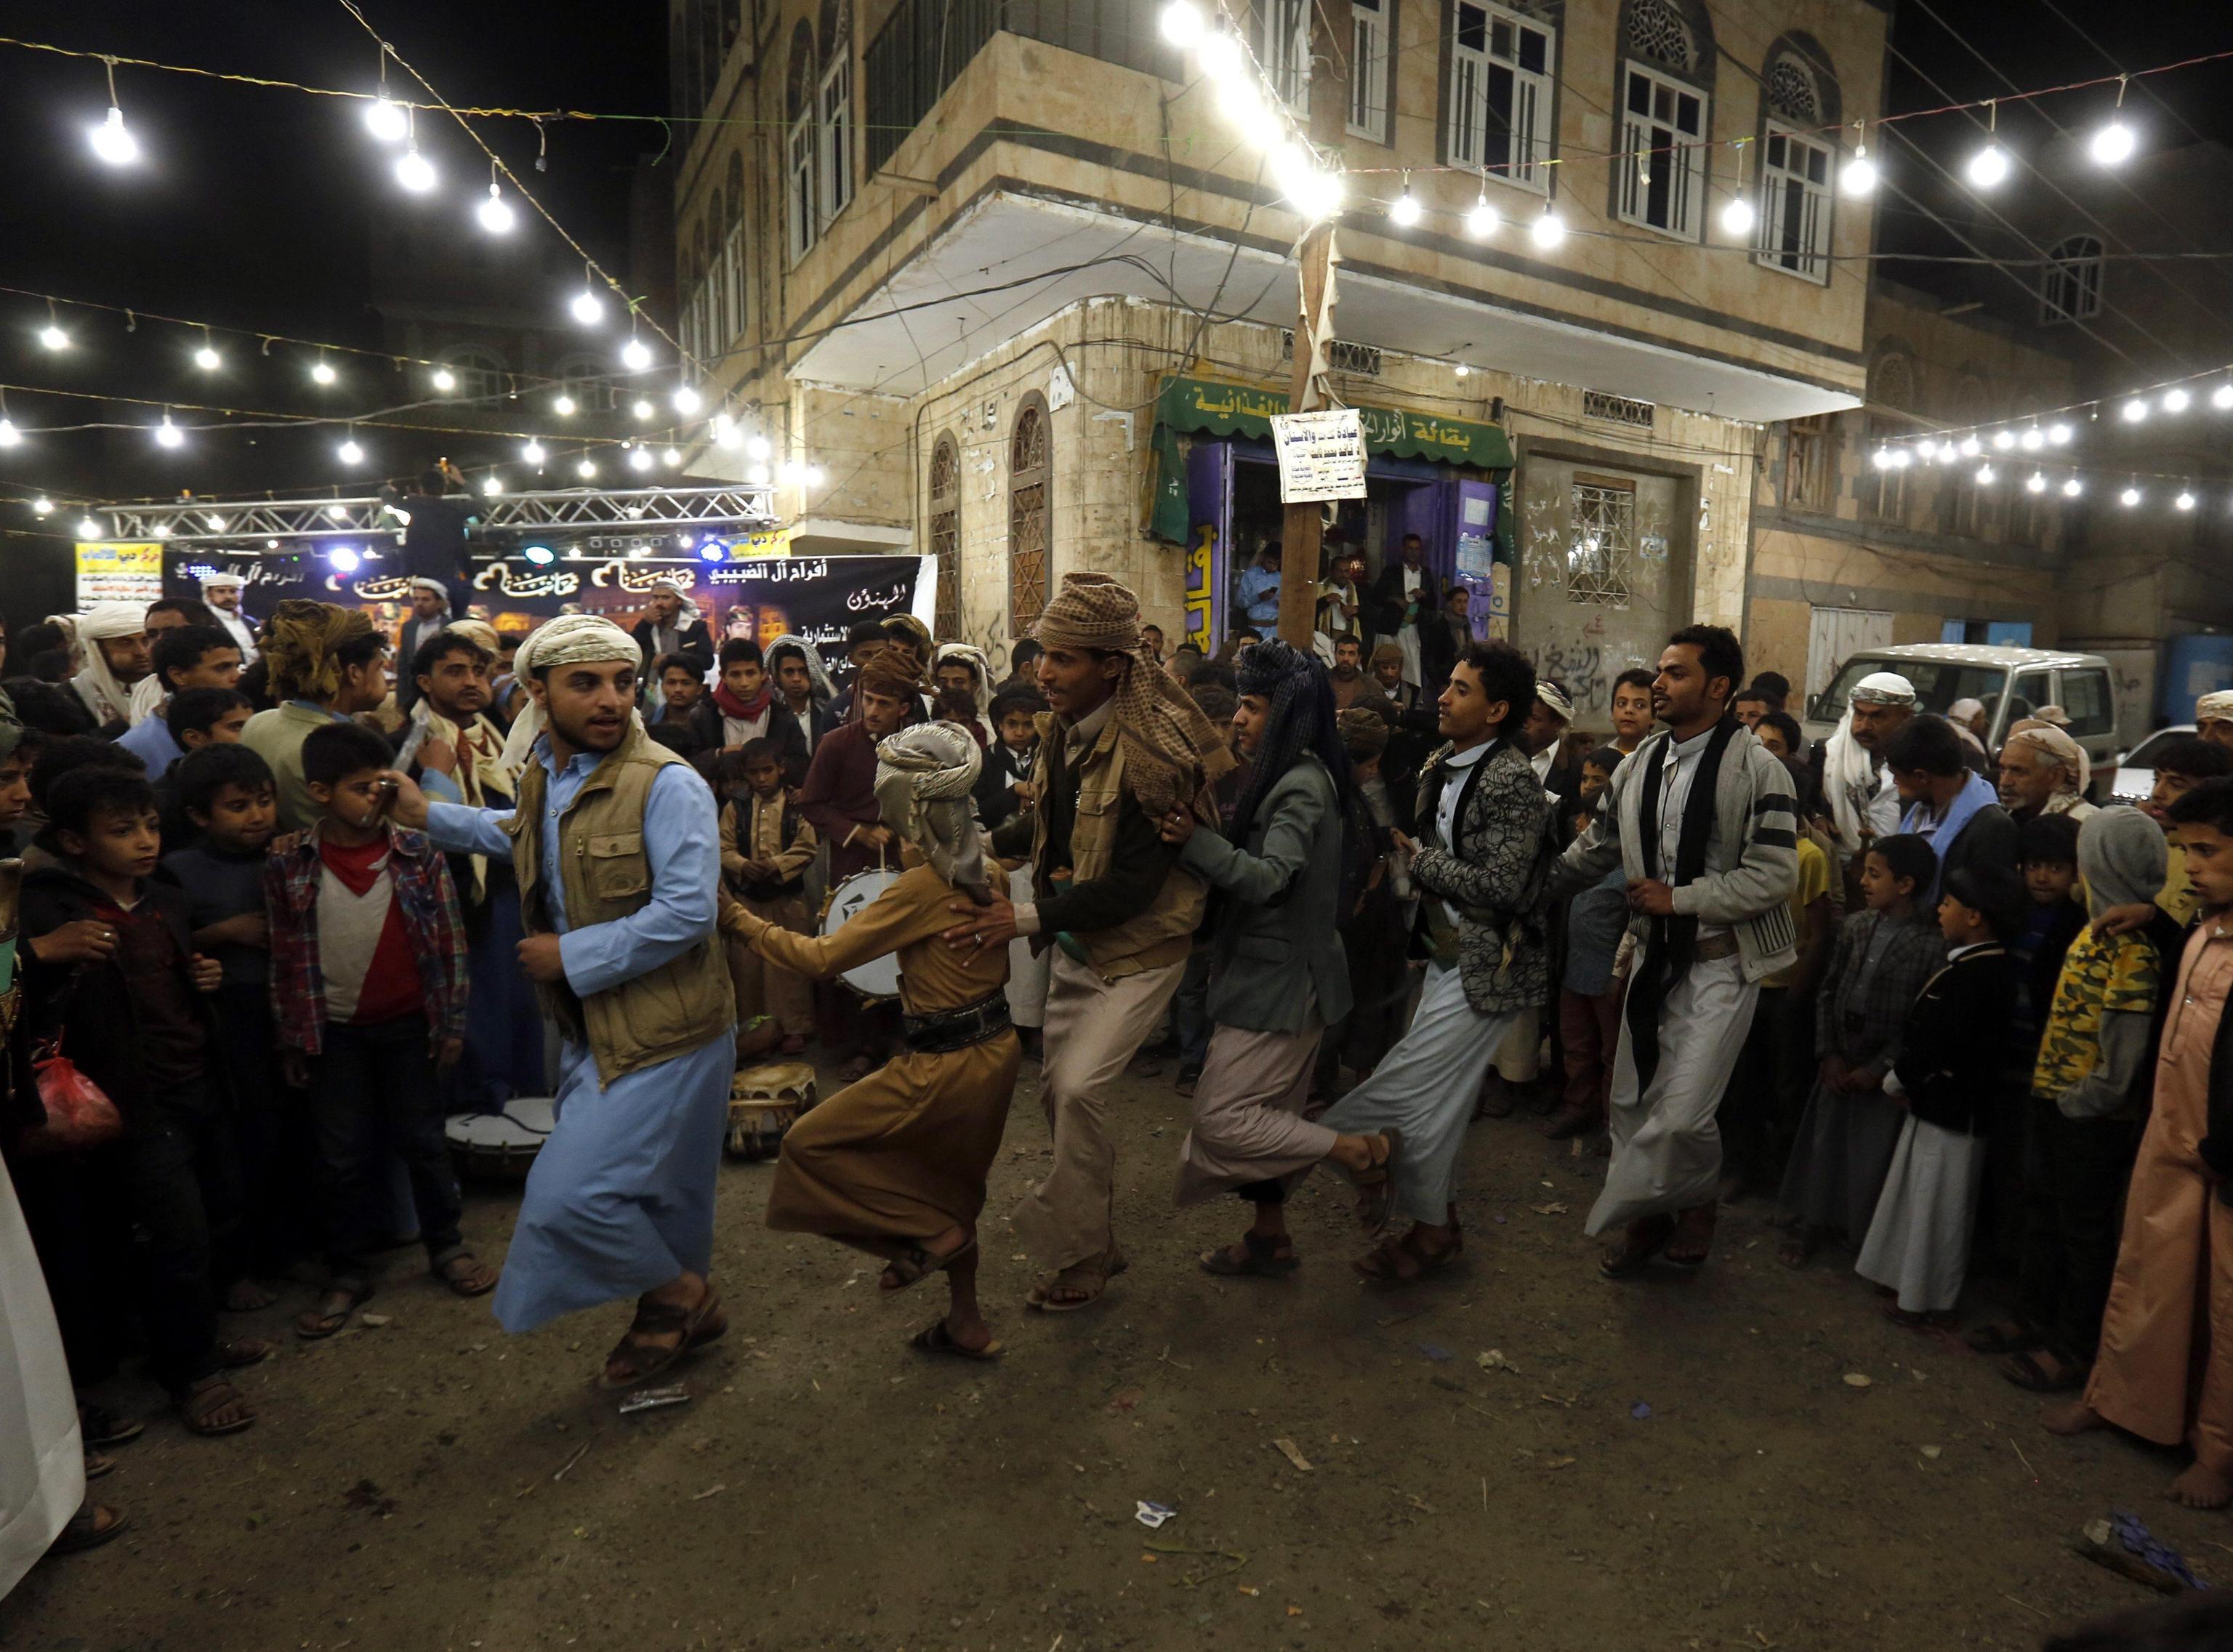 epa05775348 A picture made available on 06 February 2017 shows Yemenis performing traditional dances during a wedding ceremony in Sana'a, Yemen, 05 February 2017. Yemen has unique traditions that gives a special character to its weddings, which are costly and lavish, especially considering the country's low per capita income and its 22-month ongoing conflict. Upon strict Muslim traditions practiced in Yemen, the wedding parties are held without intermixing; the brides and grooms are kept in separate halls.  EPA/YAHYA ARHAB